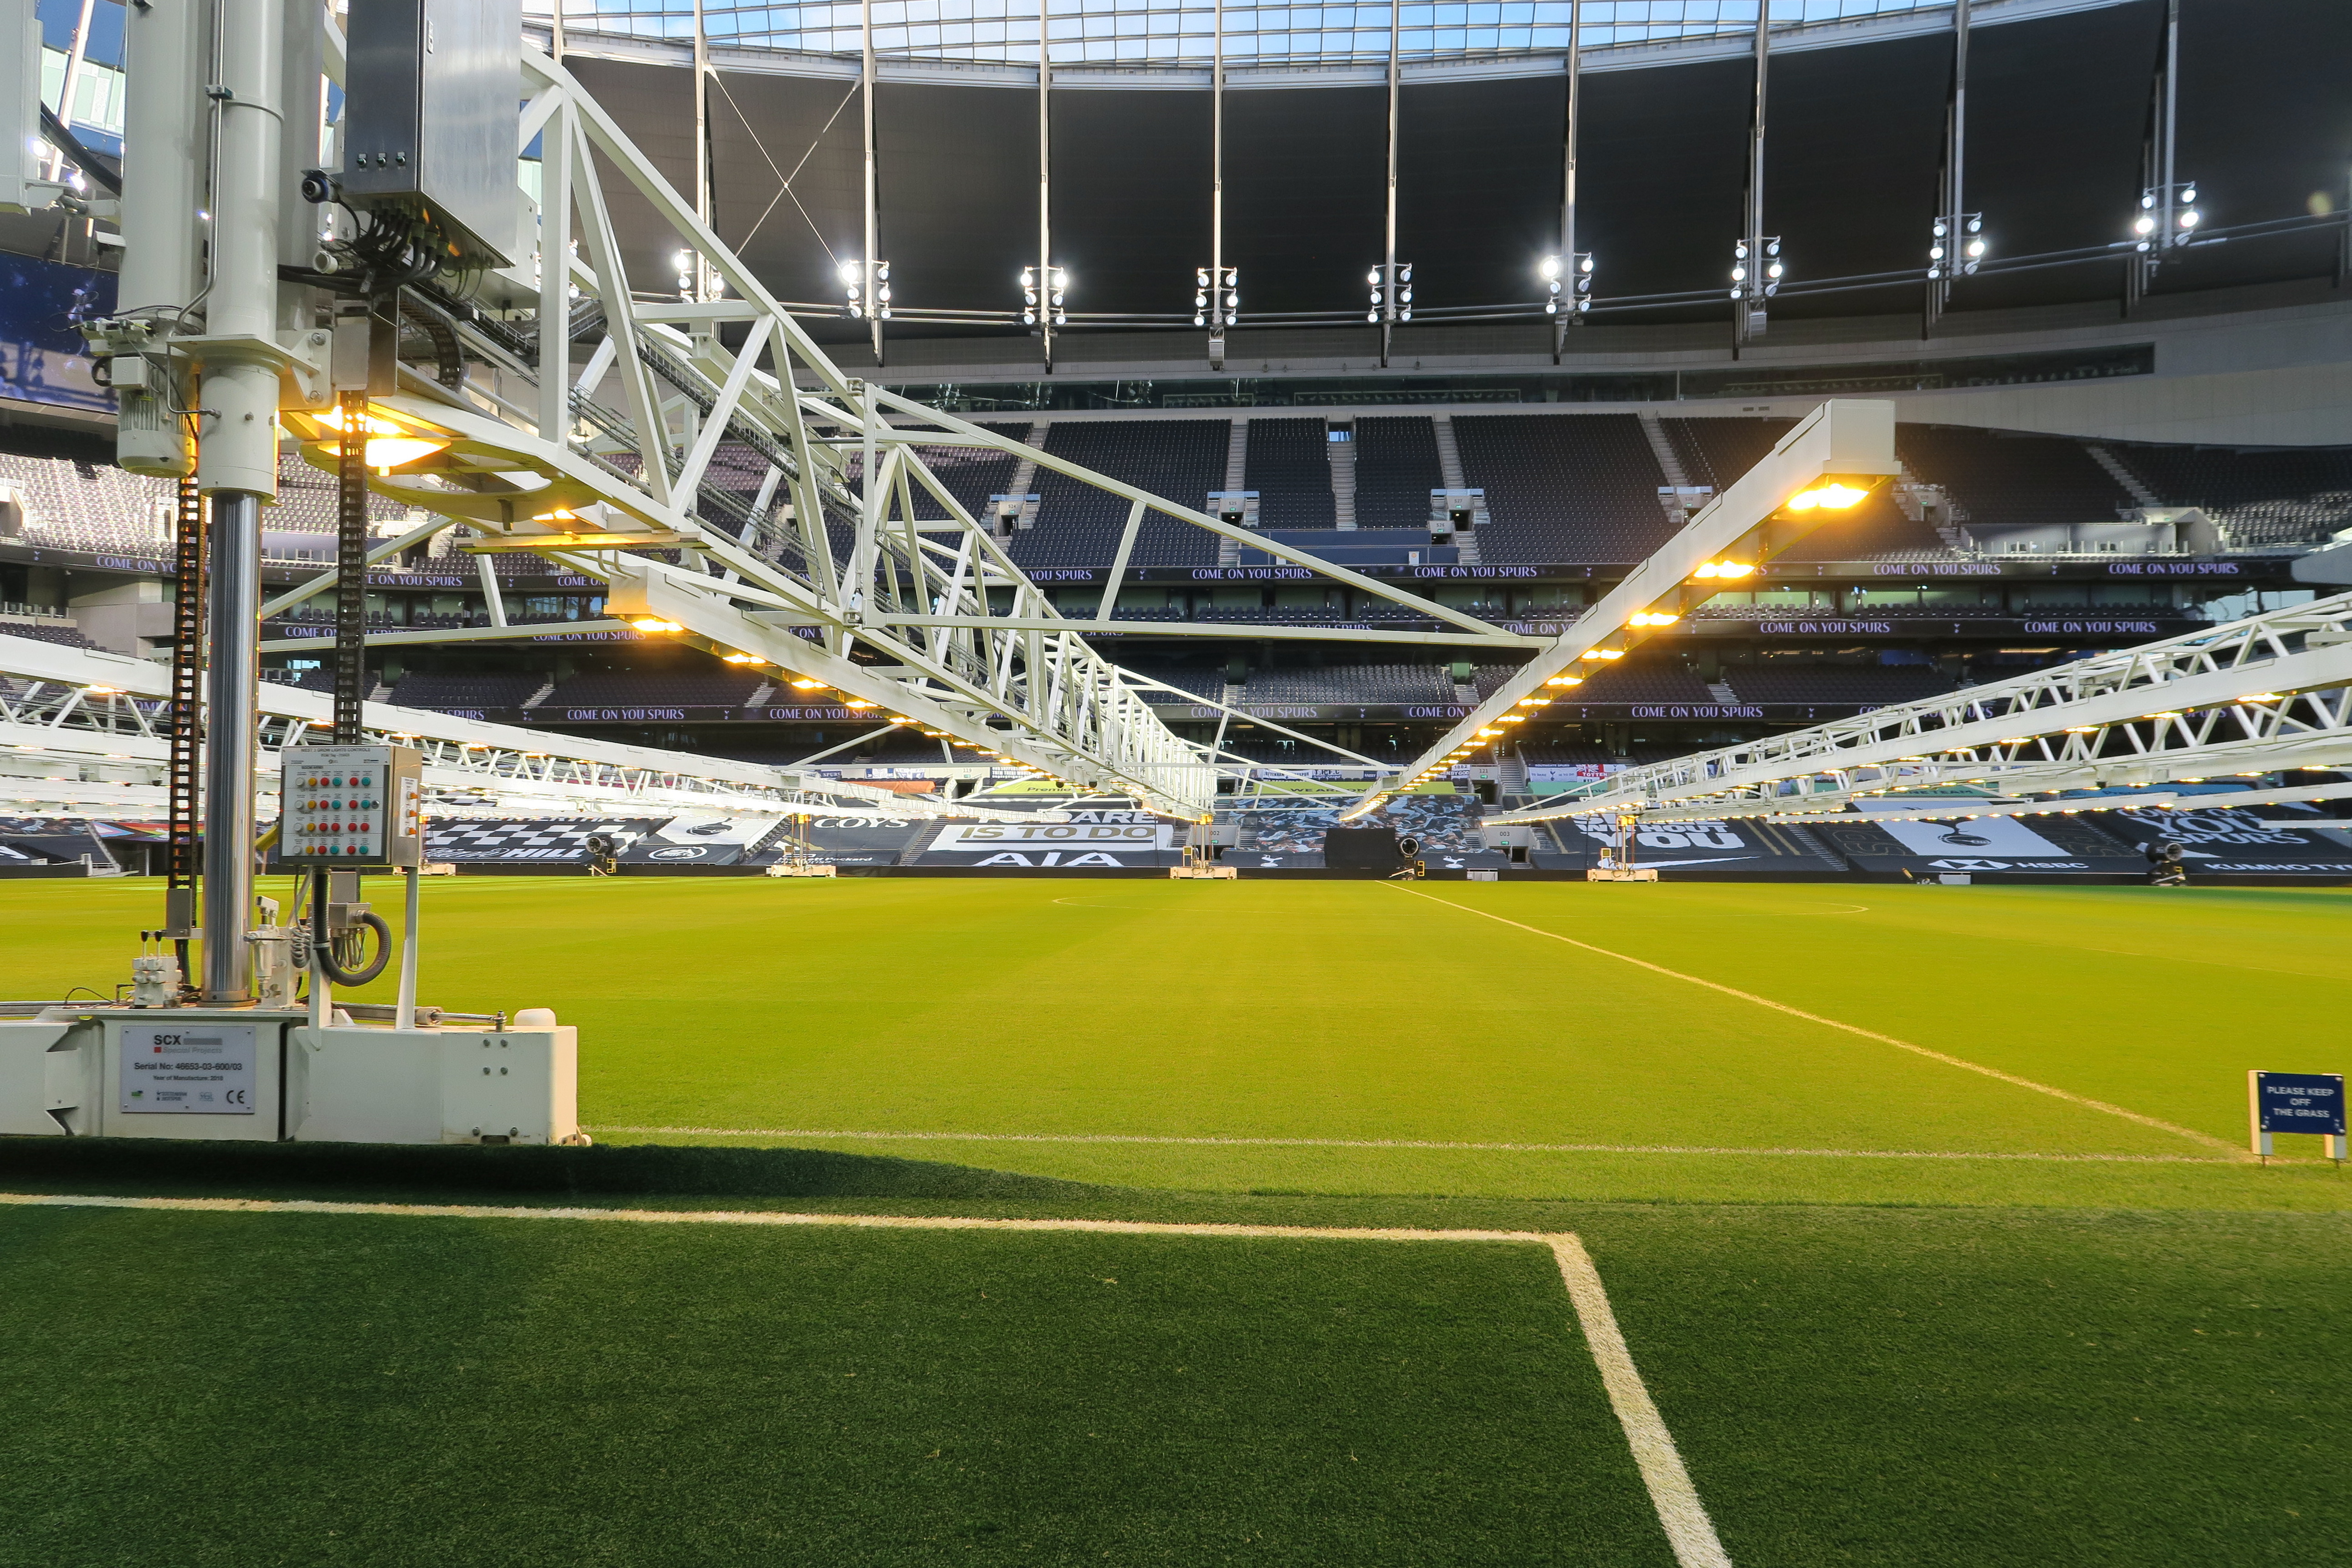 Grow lights suspended over the pitch at Tottenham Hotspur Stadium 2020